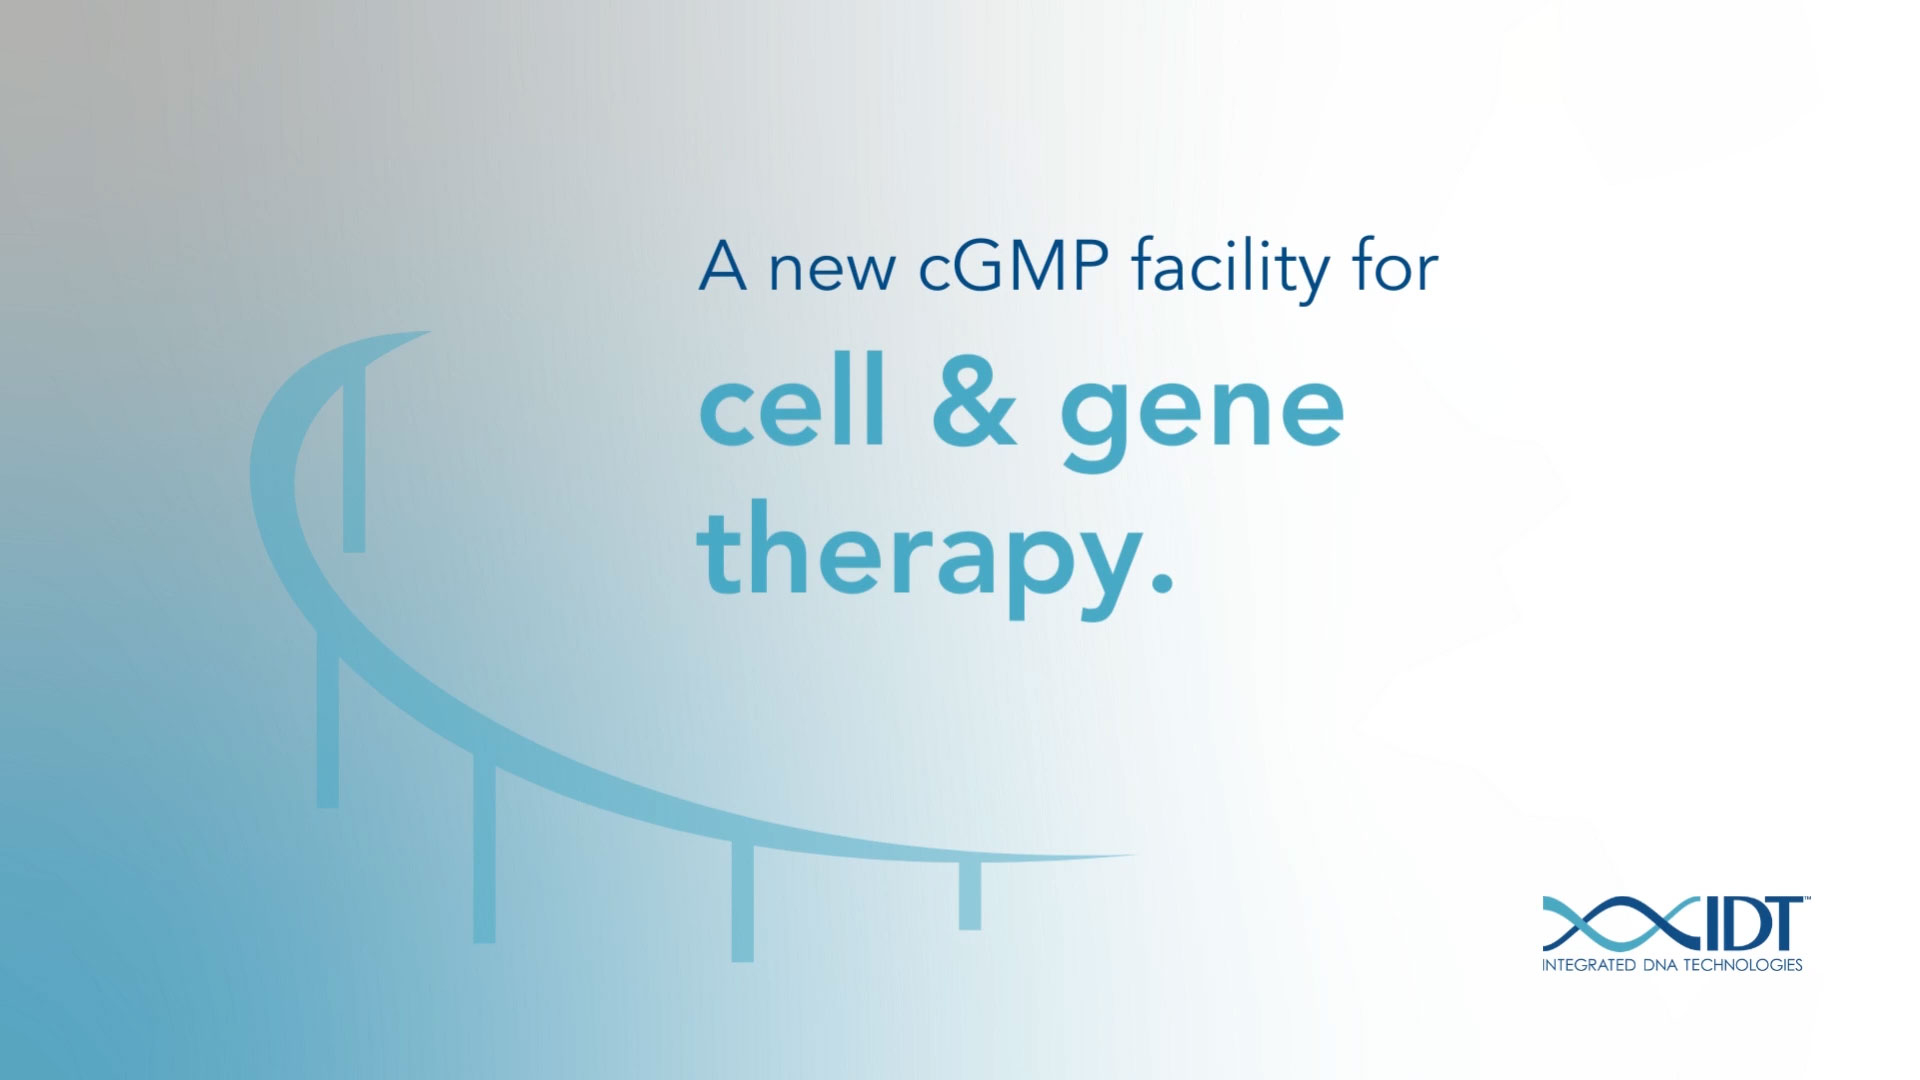 Integrated DNA Technologies announces the opening of its new therapeutic manufacturing facility, marking its entrance into the CRISPR therapeutics space to provide researchers with a single partner that can help accelerate their path to the clinic.